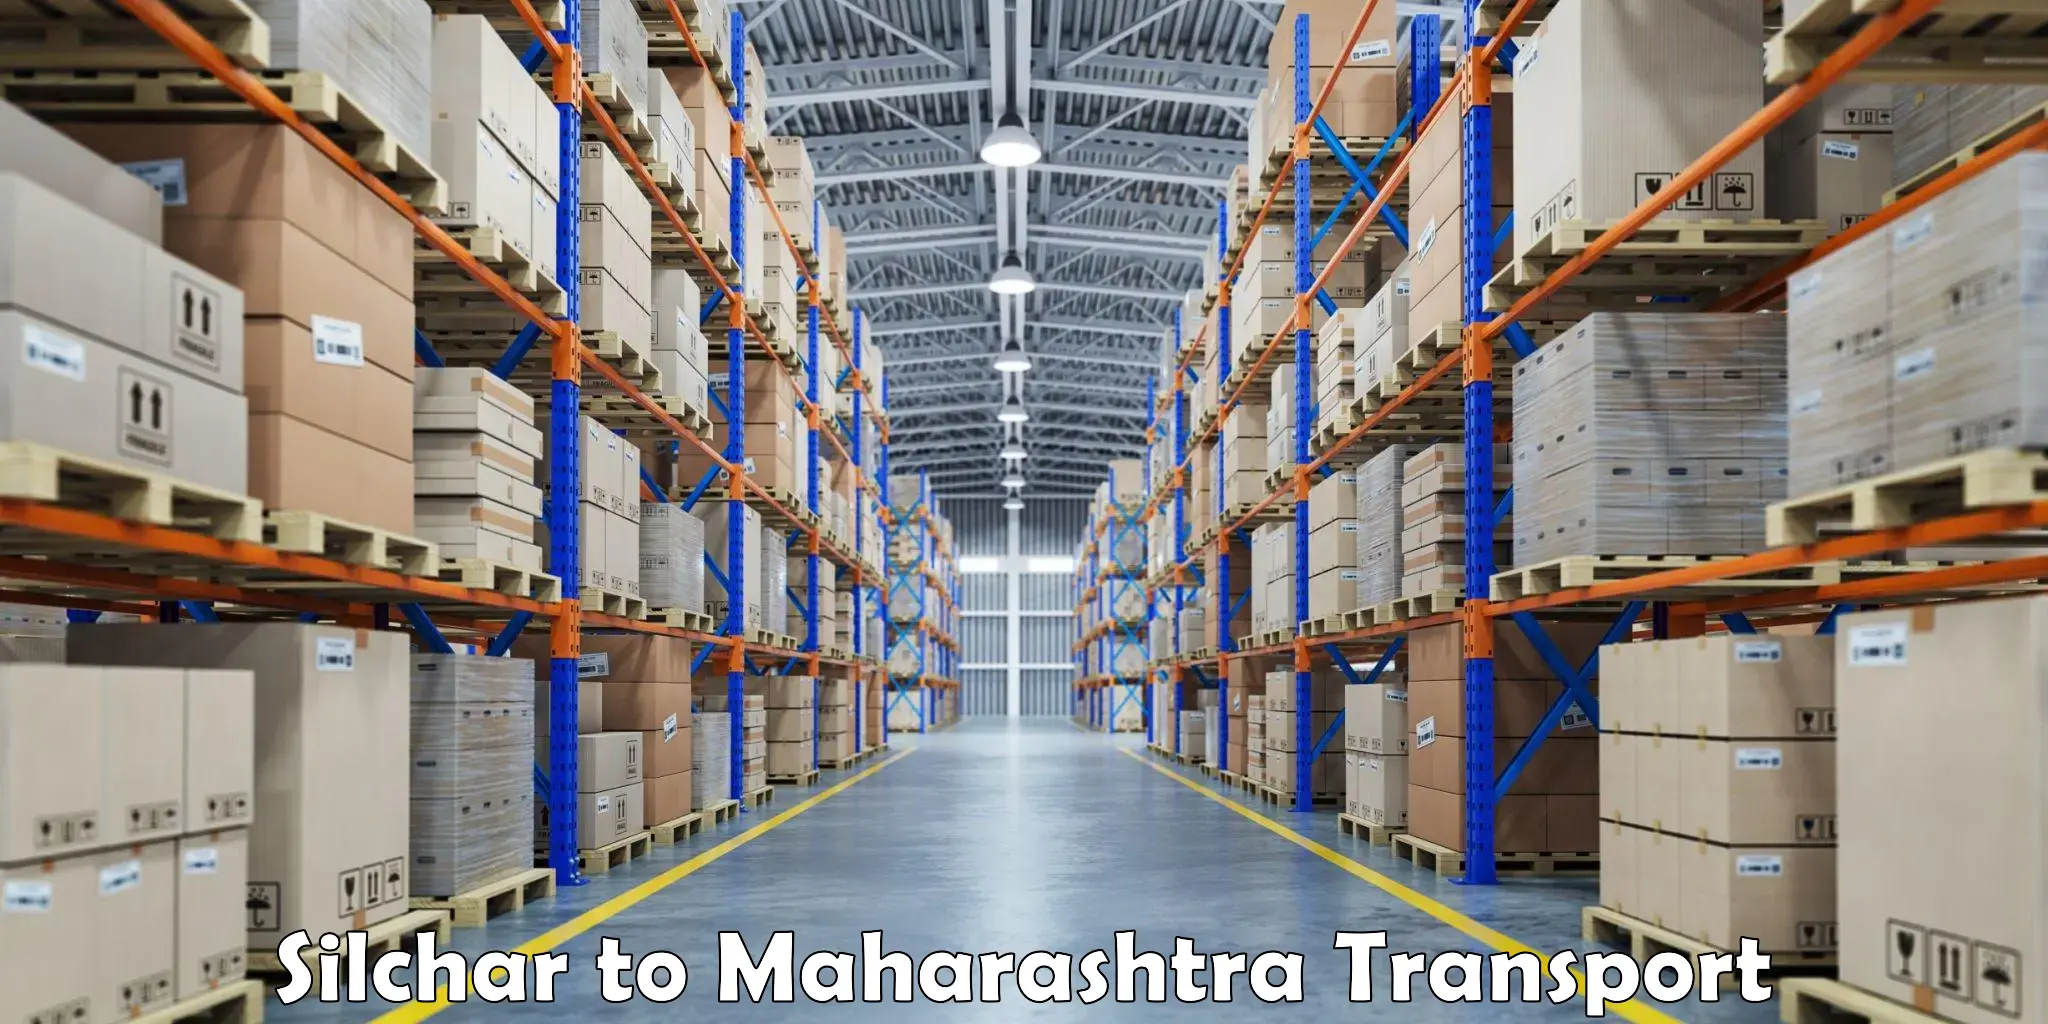 Furniture transport service in Silchar to Chalisgaon